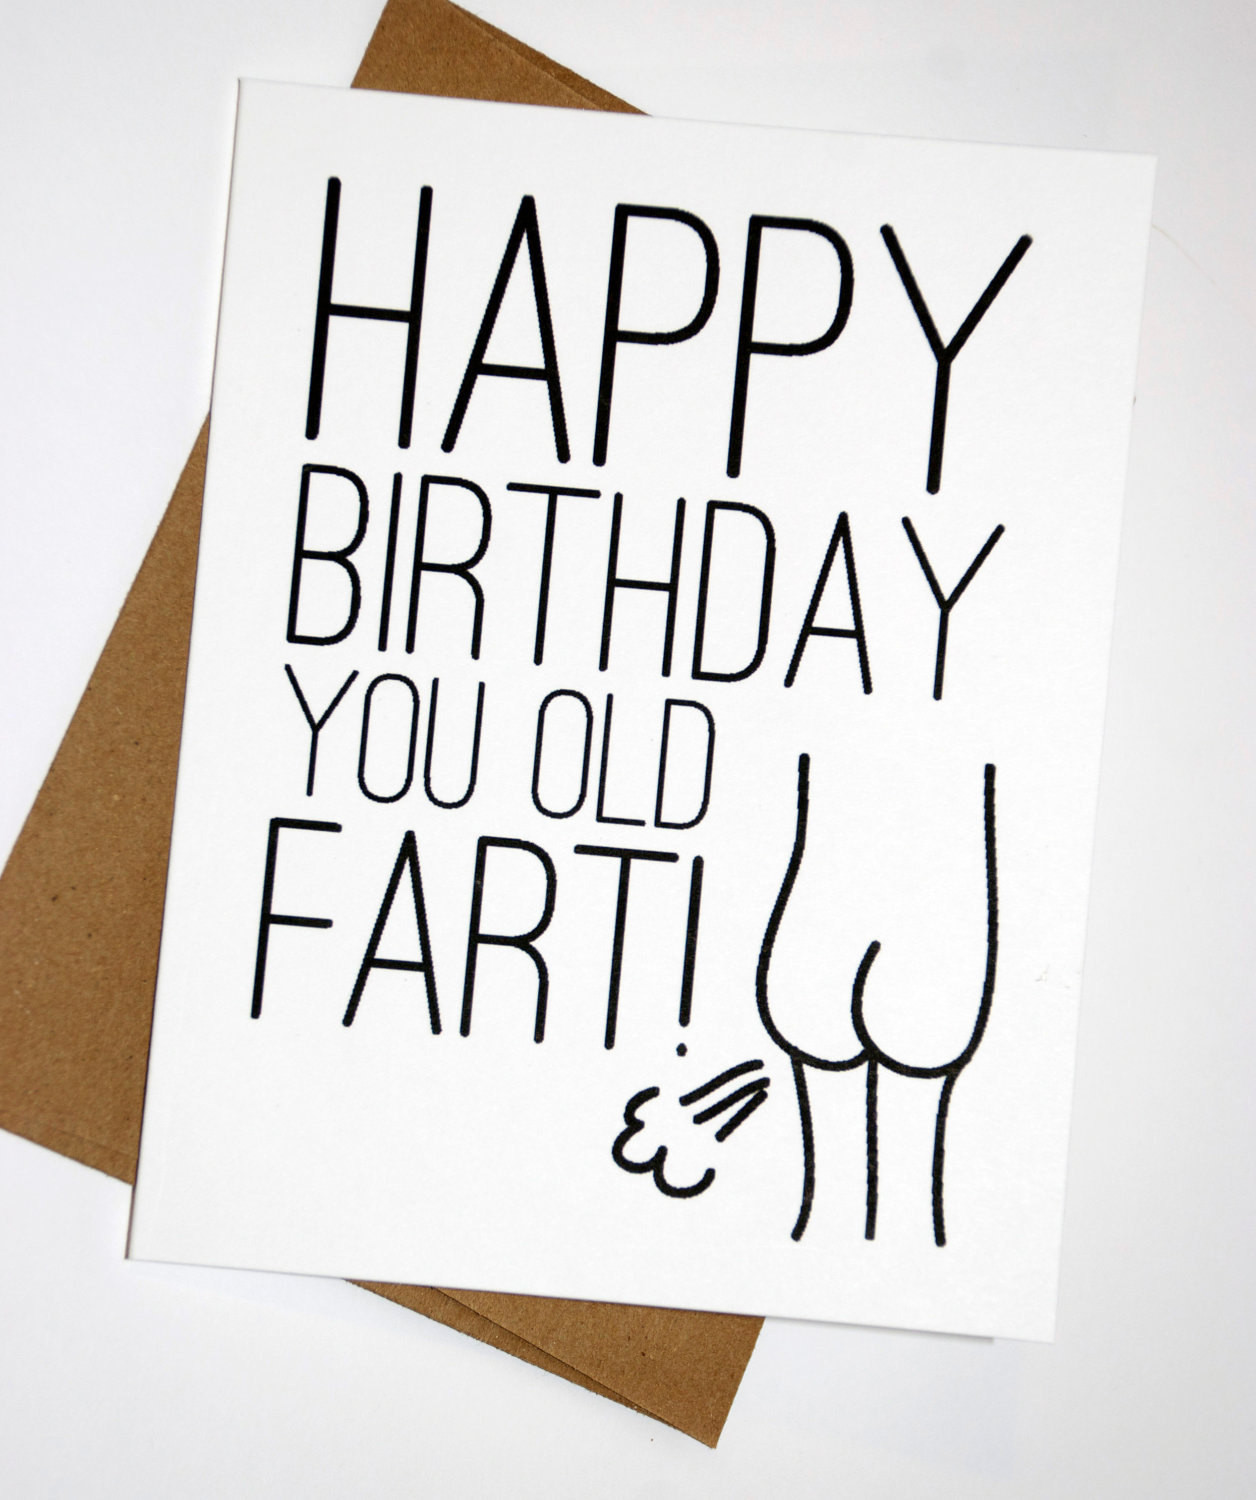 Best ideas about Happy Birthday Old Funny
. Save or Pin Funny Birthday Card Happy Birthday You Old Fart by RowHouse14 Now.